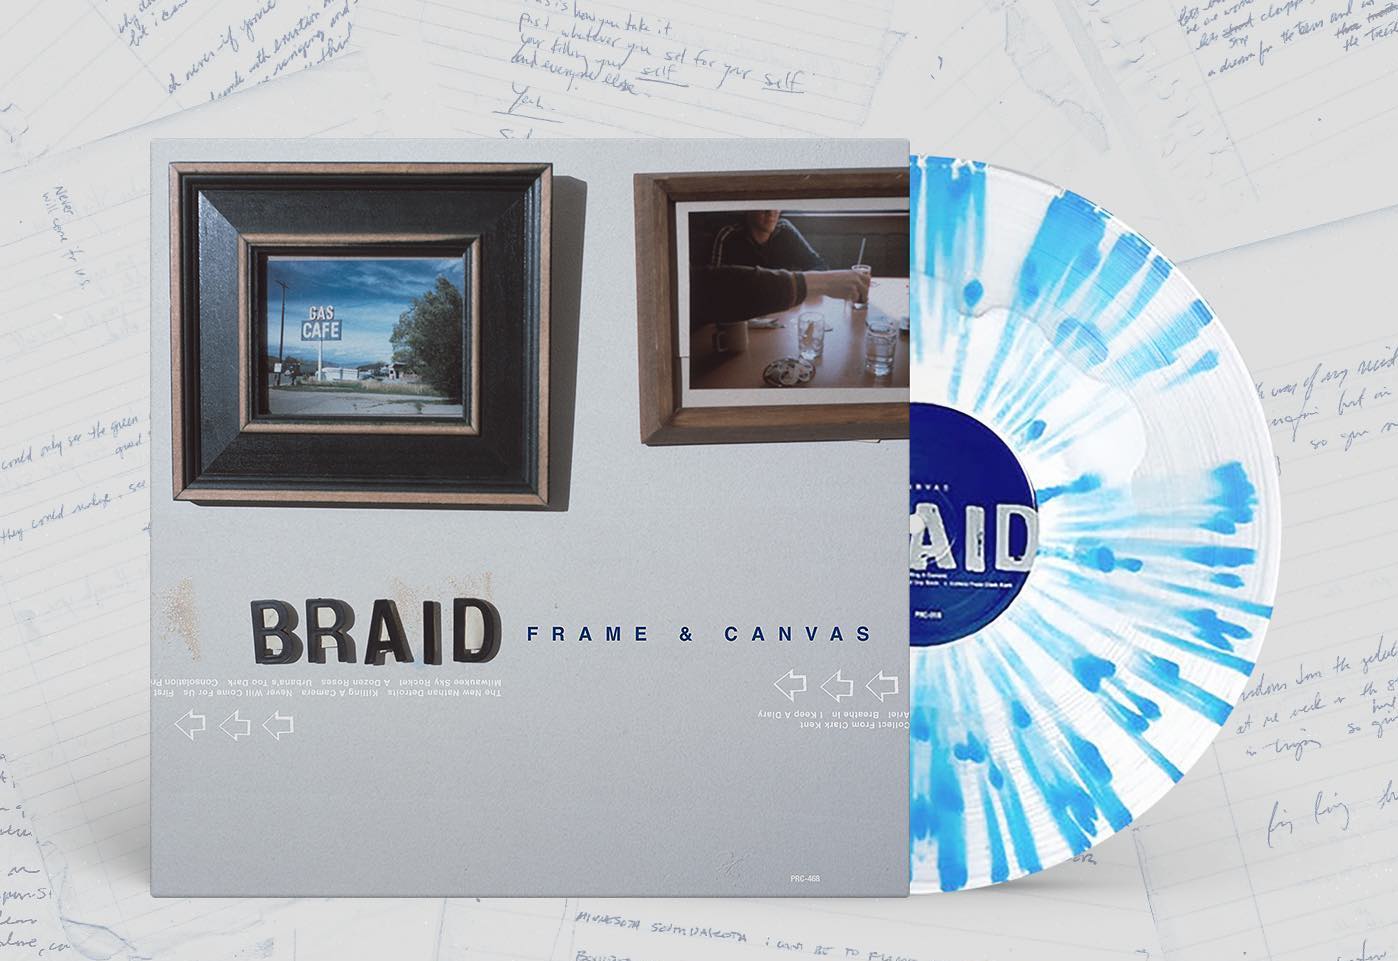 Braid's reissued album, Frame & Canvas. The booklet is open and sits on a white background with handwritten notes.